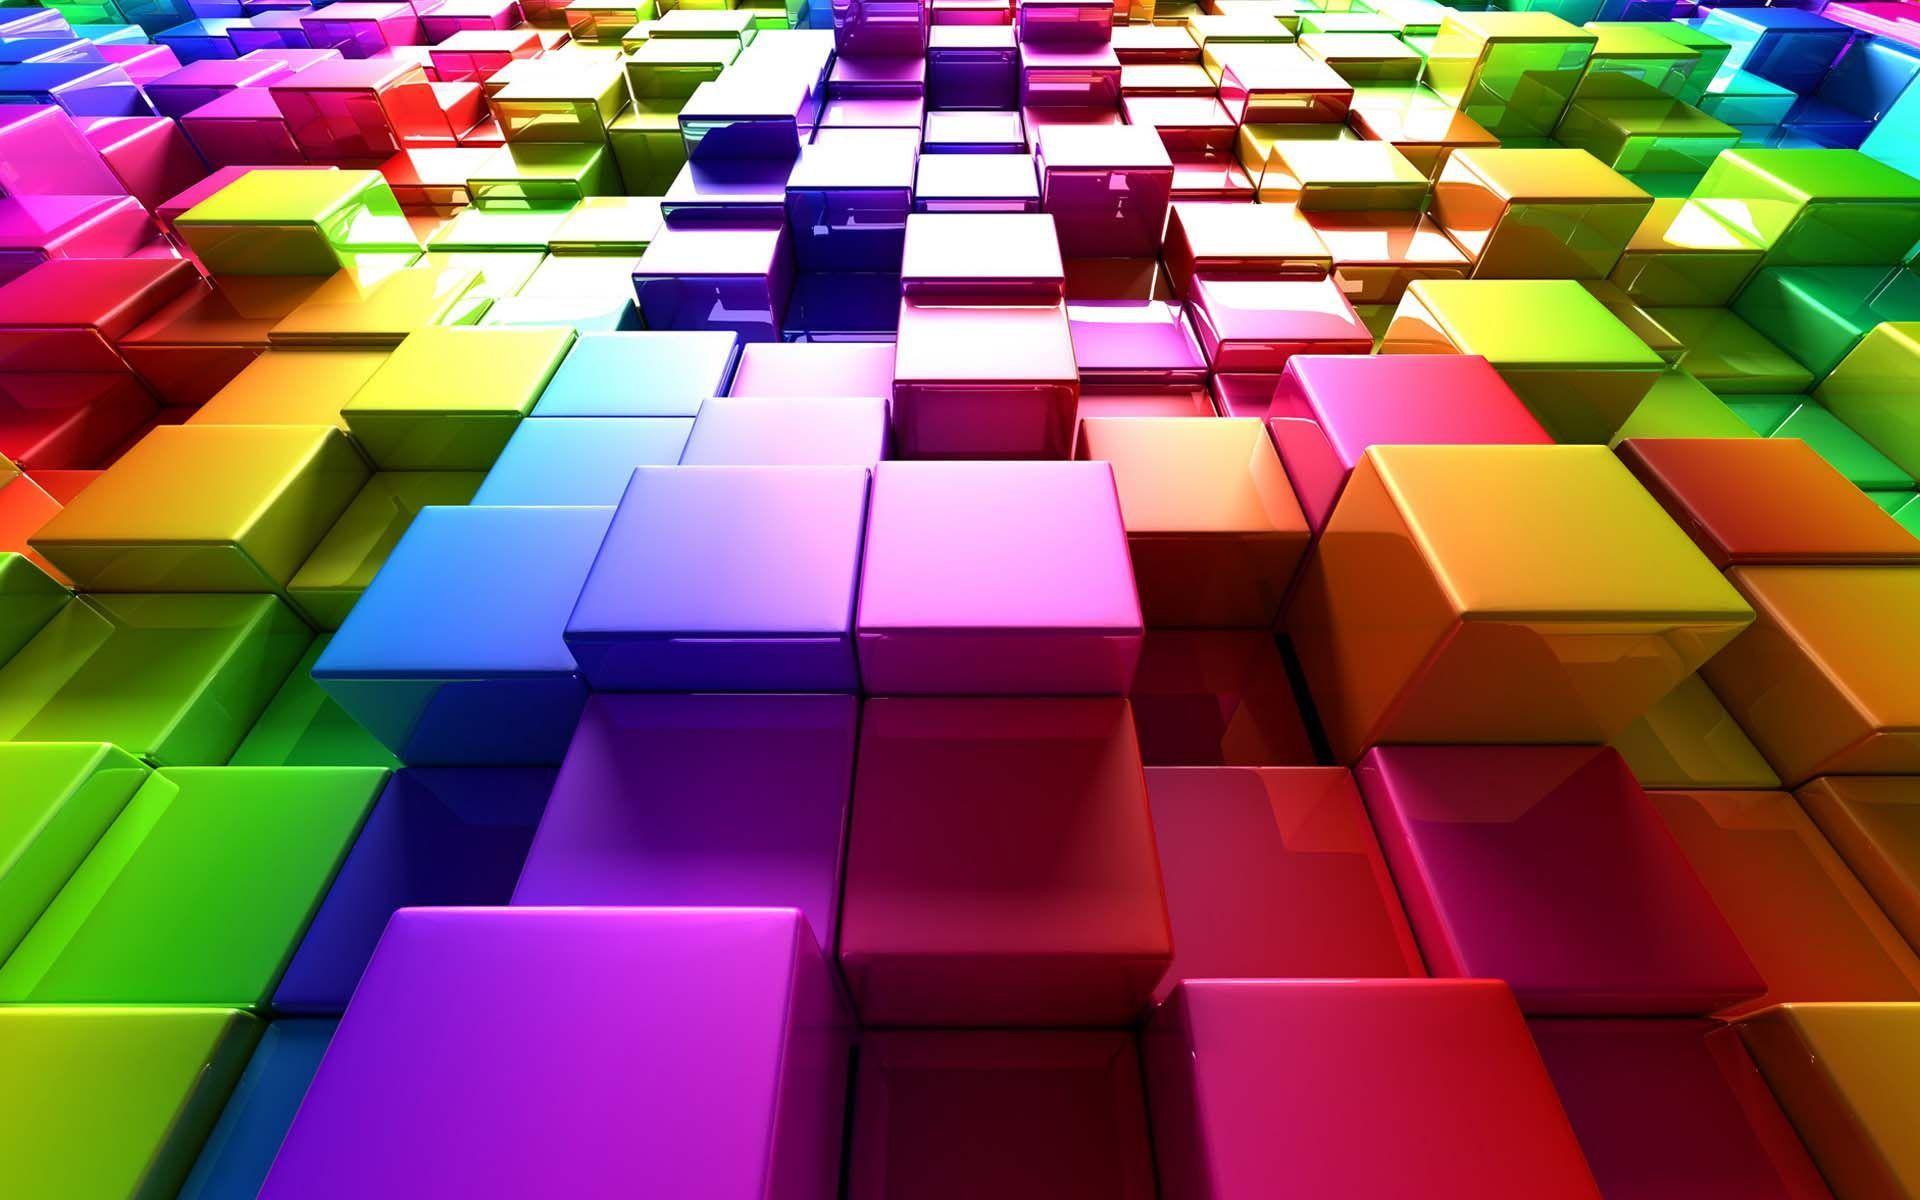 Free blocks Wallpaper HD for Desktop, Android and iPhone